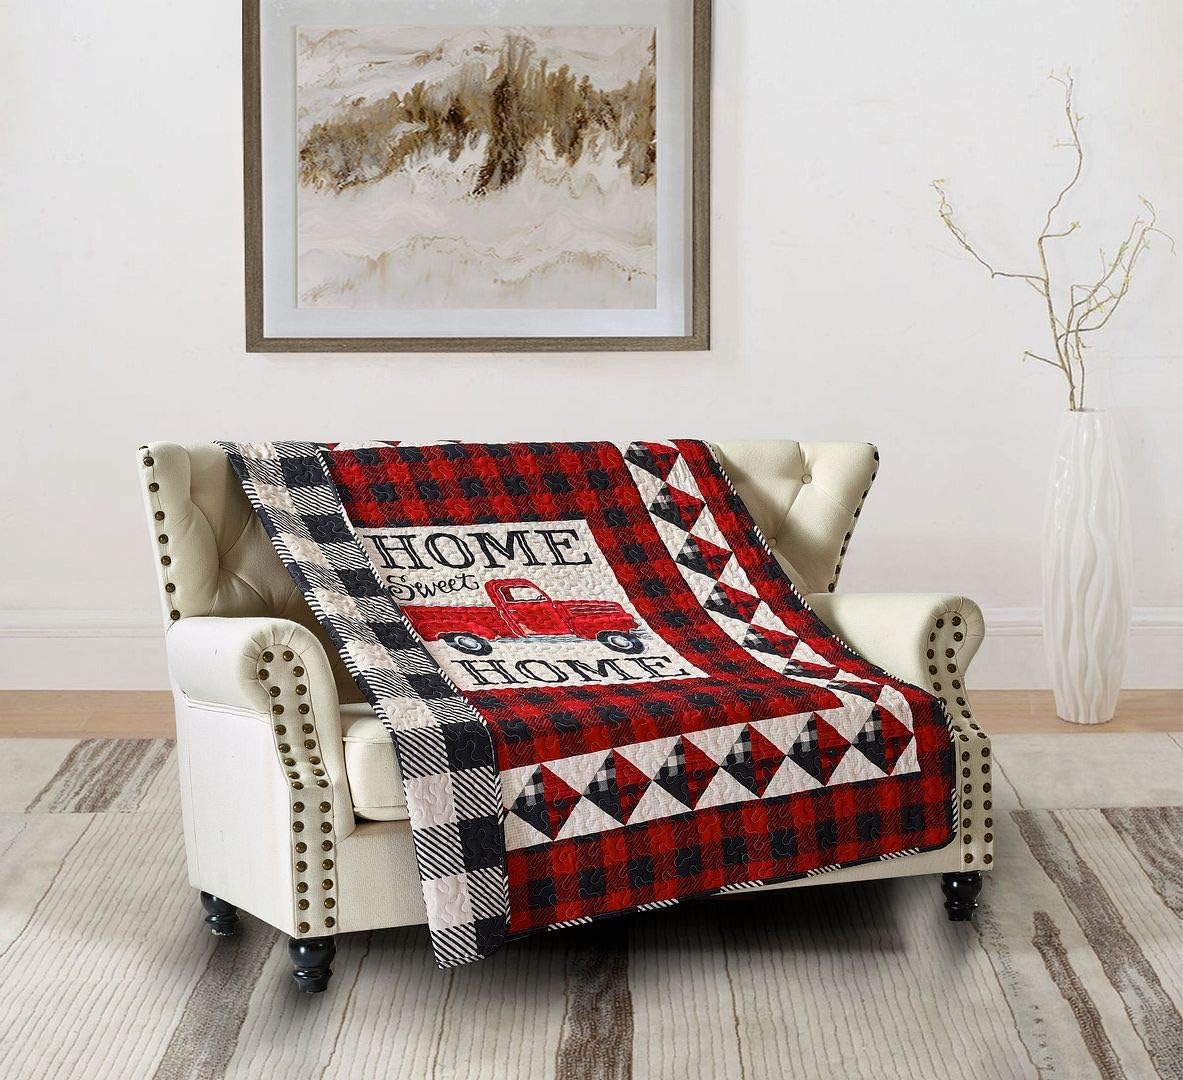 Virah Bella Quilted Throw Blanket 50" x 60" Red Truck Home Sweet Home Lightweight Throw Quilt Great for Loungers & Extra Bedding - Beautiful Lodge-Themed Blanket